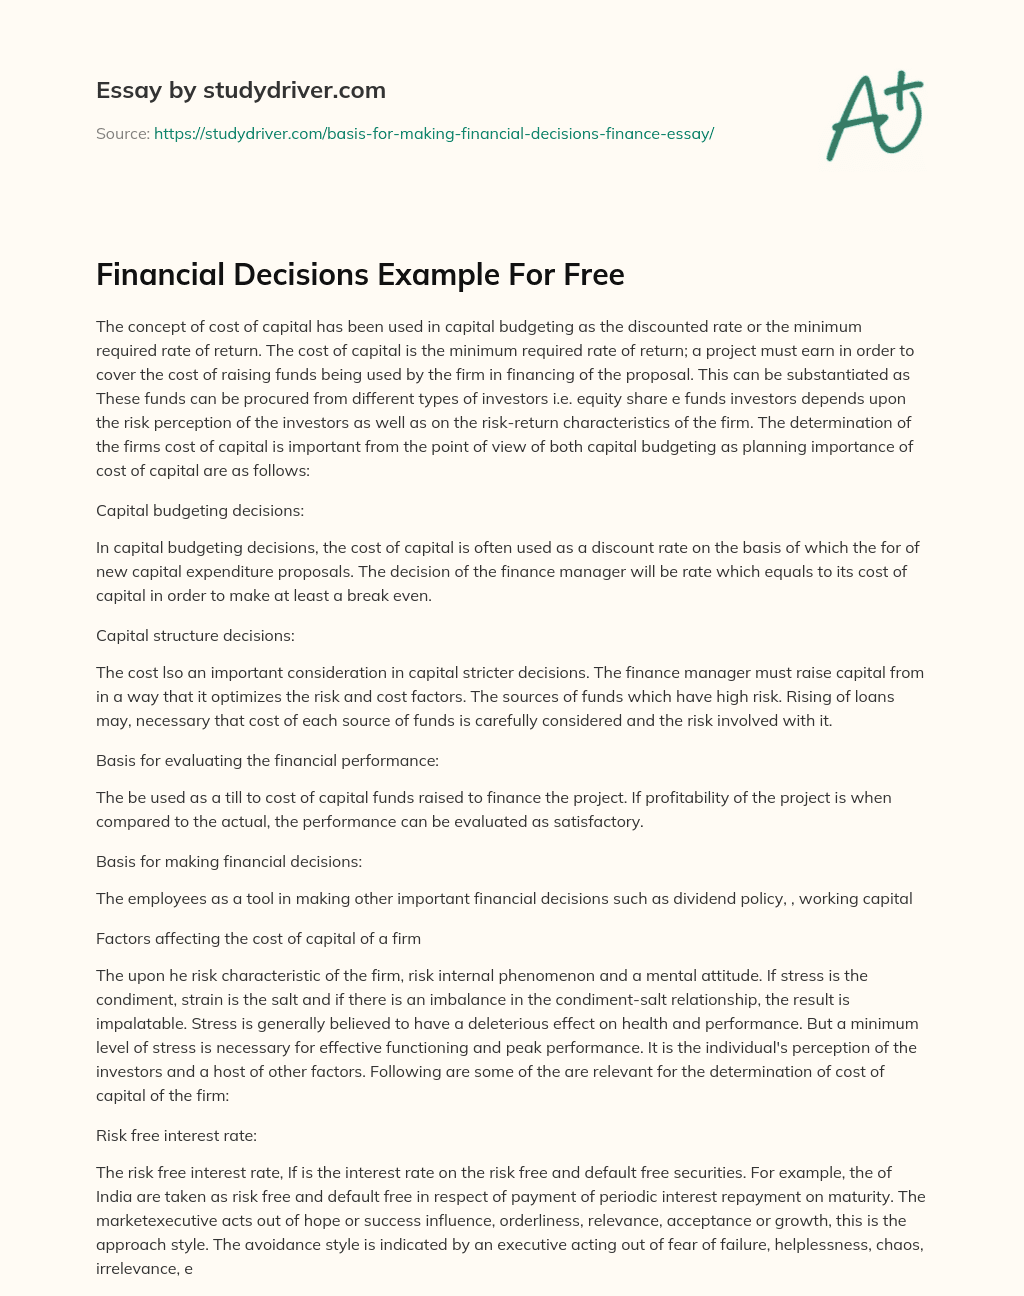 Financial Decisions Example for Free essay